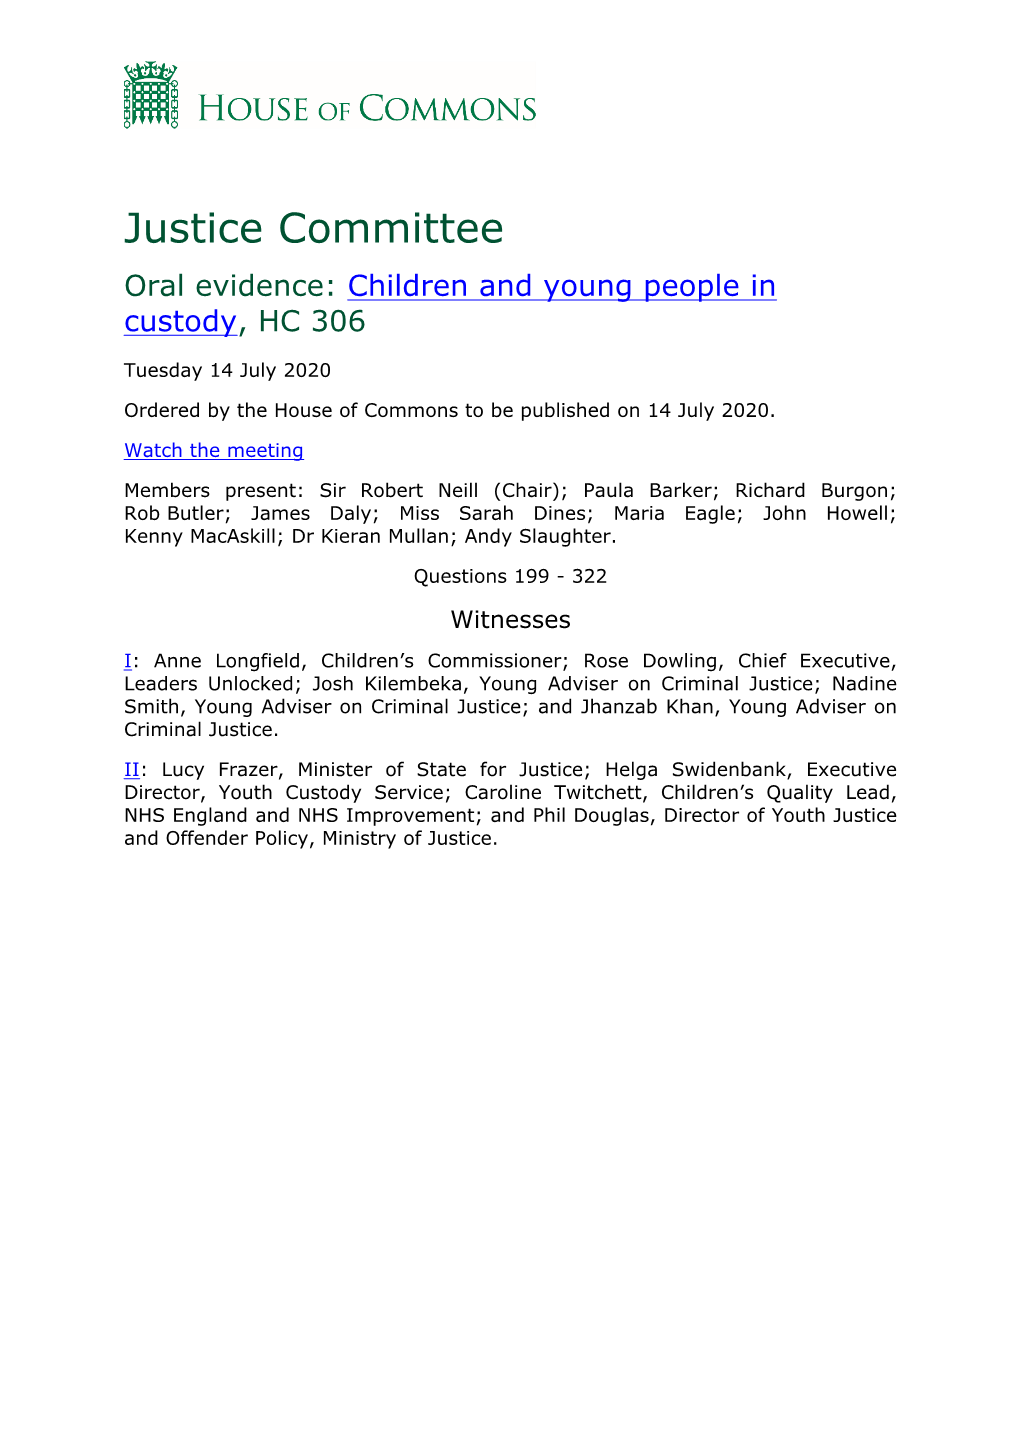 Justice Committee Oral Evidence: Children and Young People in Custody, HC 306